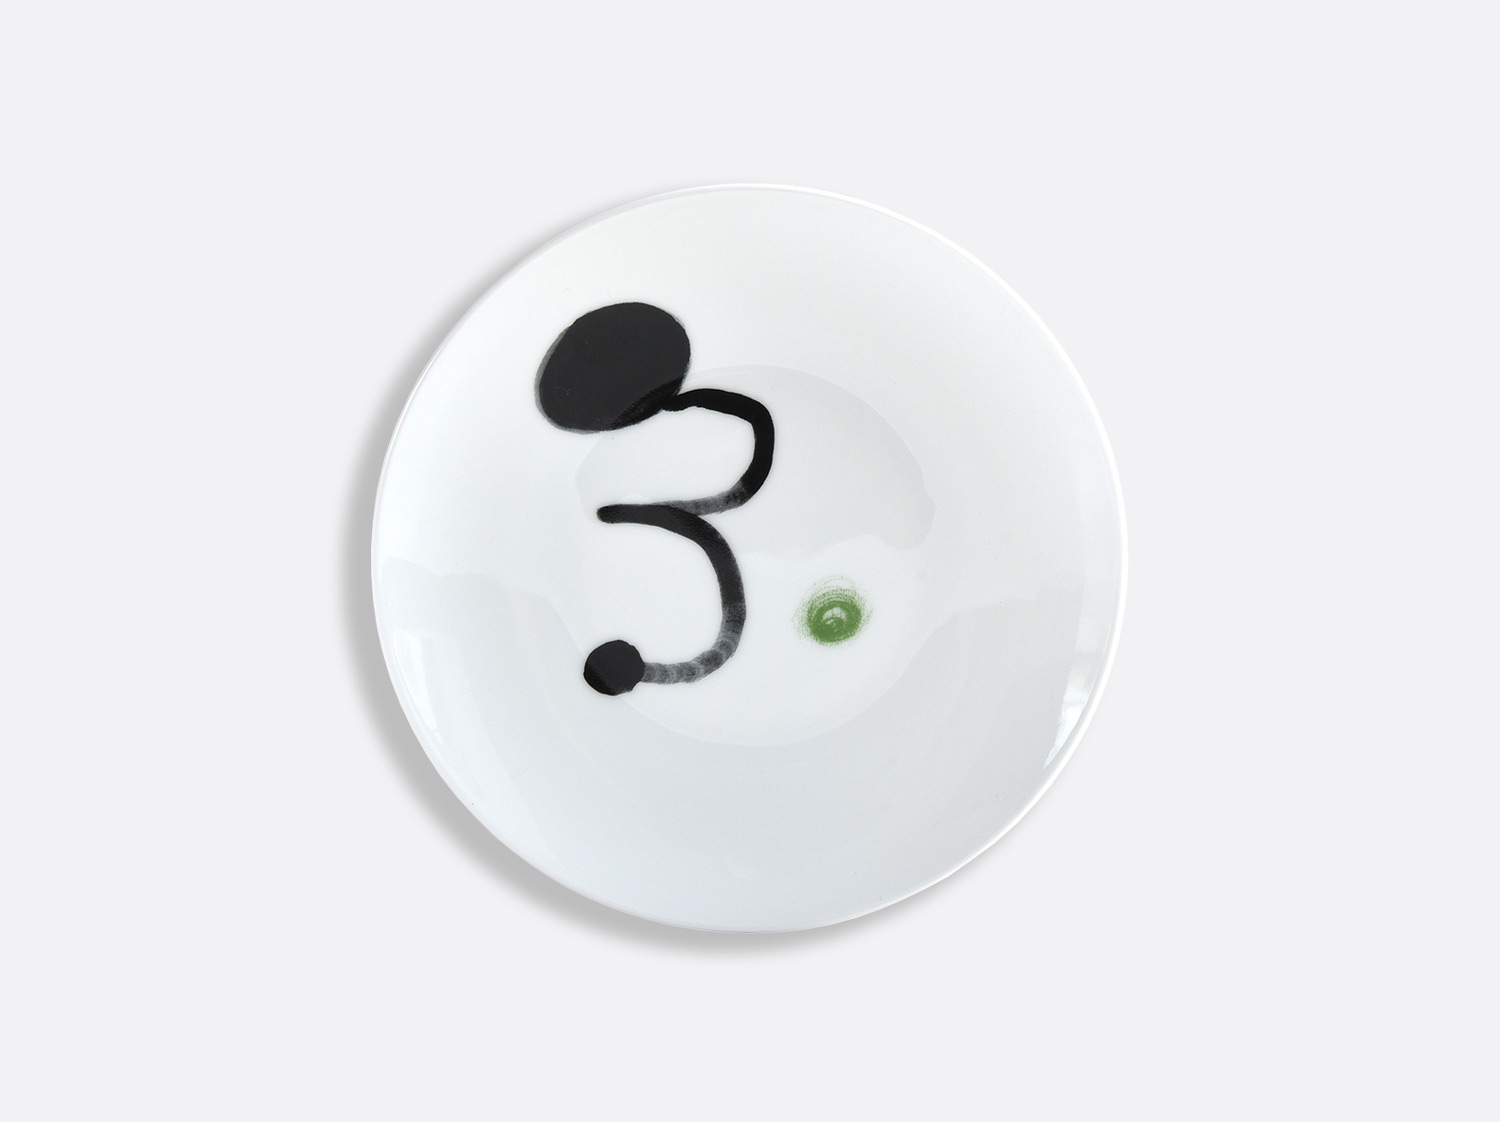 China 2 Bread and butter plates 16 cm Vert Clair - Page 52 of the collection PARLER SEUL - Joan Miro | Bernardaud